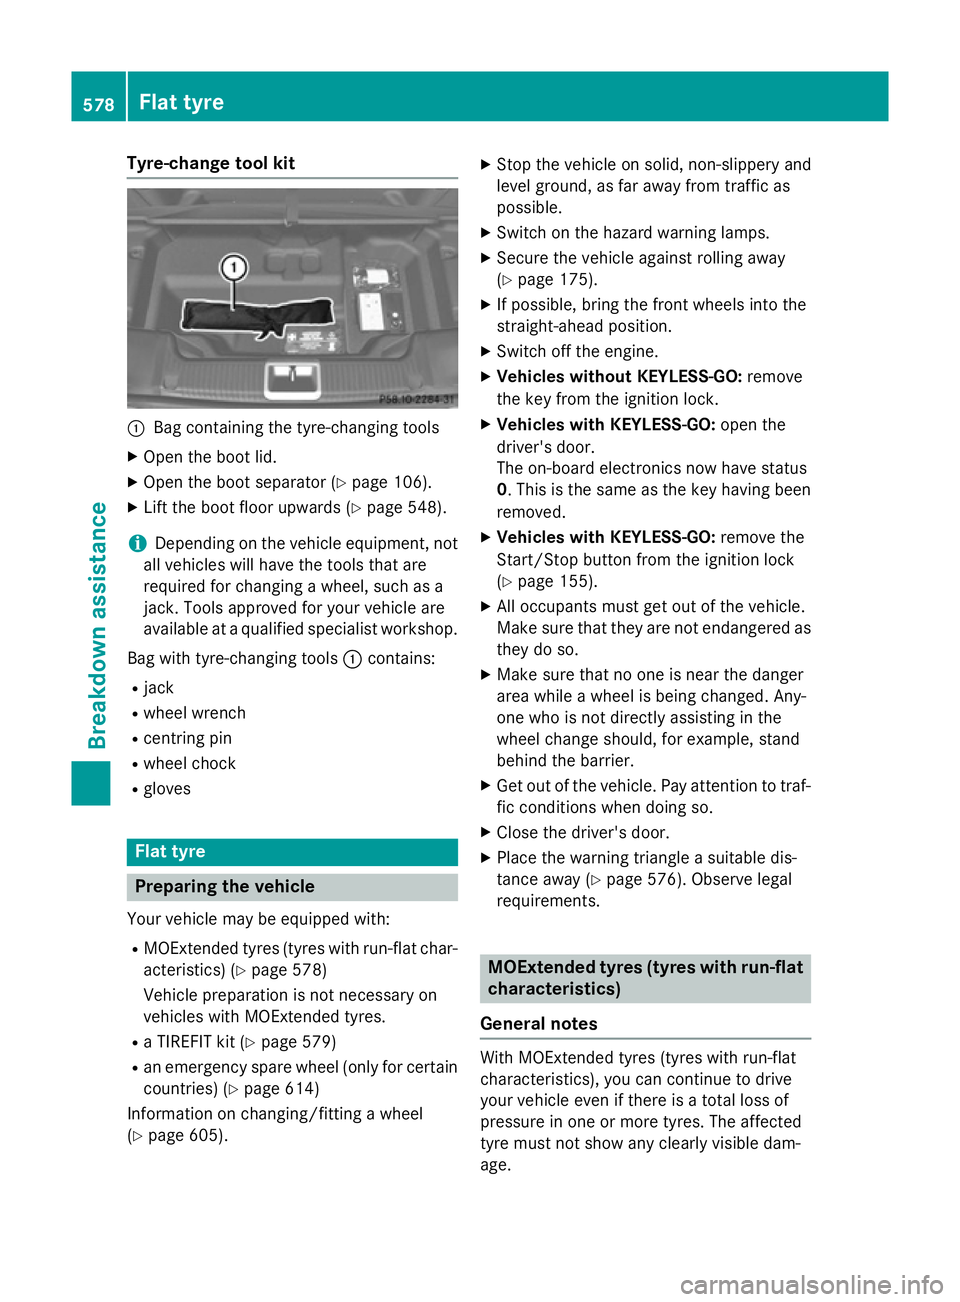 MERCEDES-BENZ SL ROADSTER 2012  Owners Manual Tyre-change tool kit
:
Bag containing the tyre-changing tools
X Open the boot lid.
X Open the boot separator (Y page 106).
X Lift the boot floor upwards (Y page 548).
i Depending on the vehicle equipm